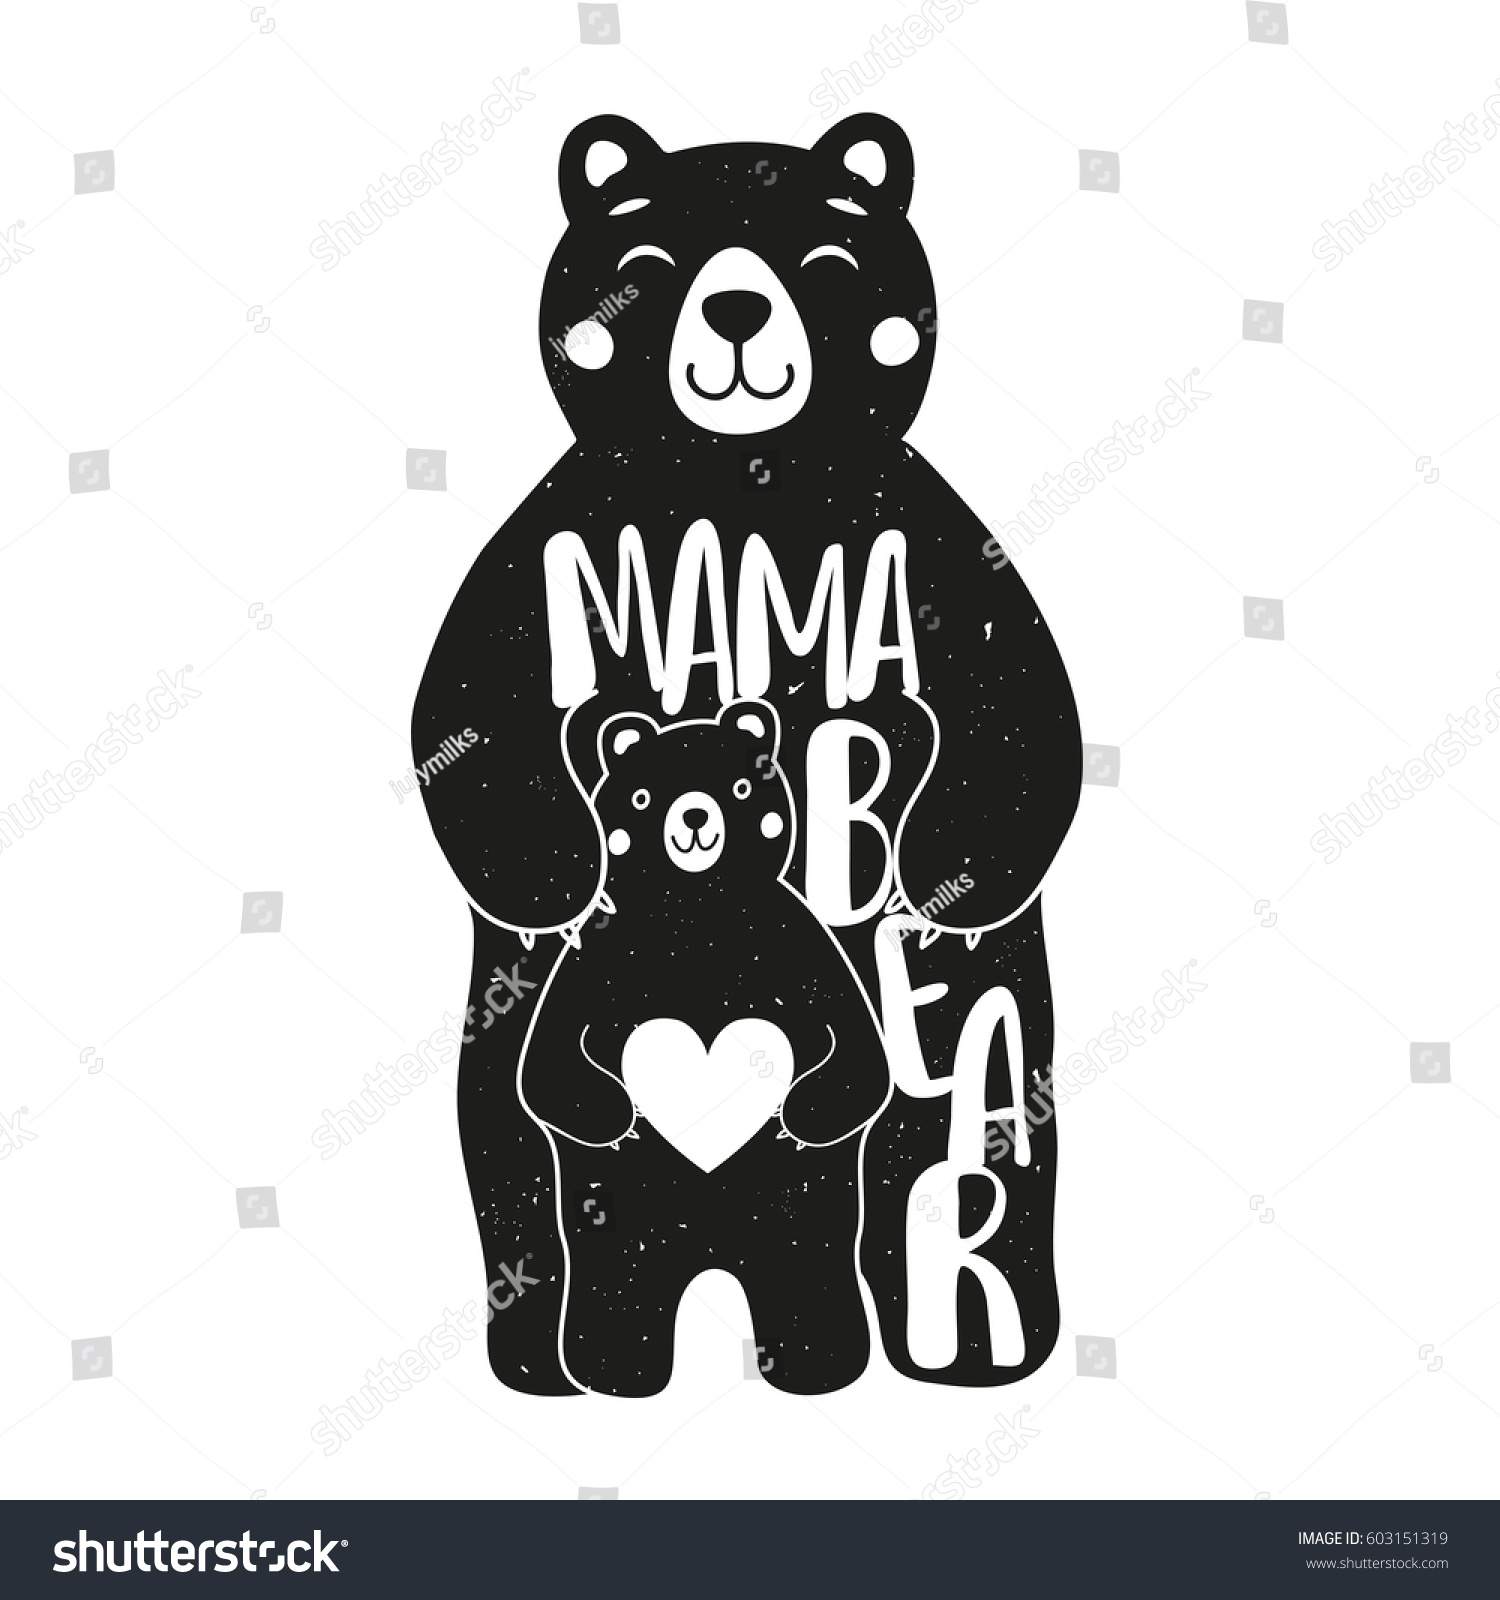 SVG of Cute vector typography poster with mother bear and baby holding white heart. Illustration with lettering quote - Mama bear. Print design, Mother's day greeting card art svg